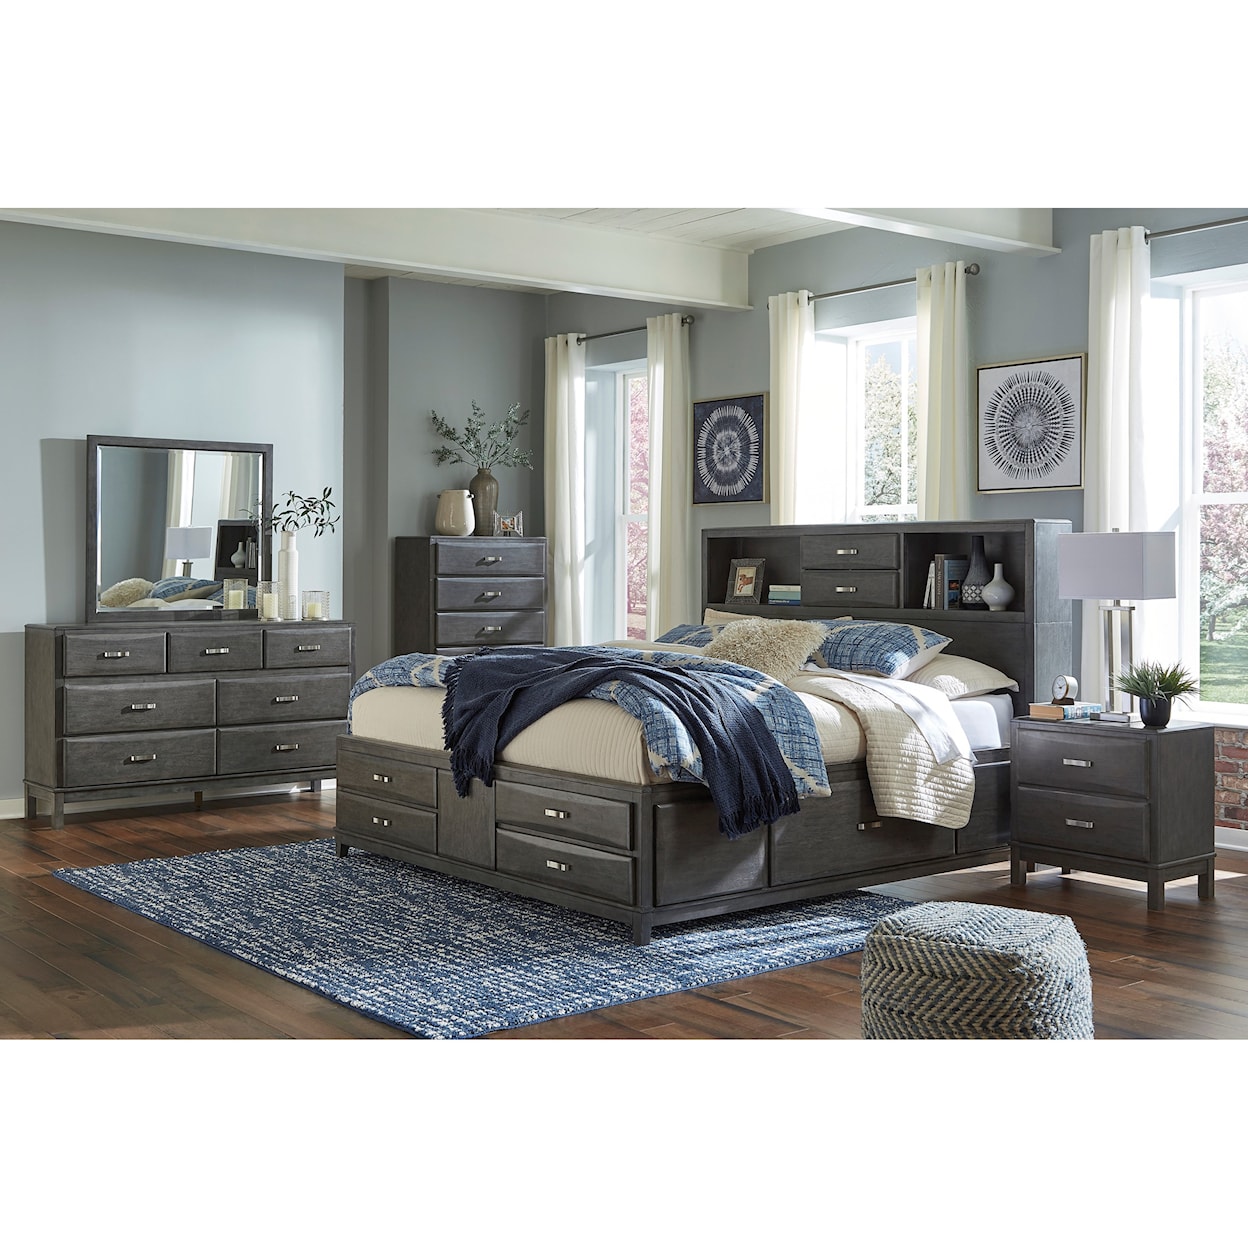 Signature Design by Ashley Caitbrook Queen Storage Bed with 8 Drawers